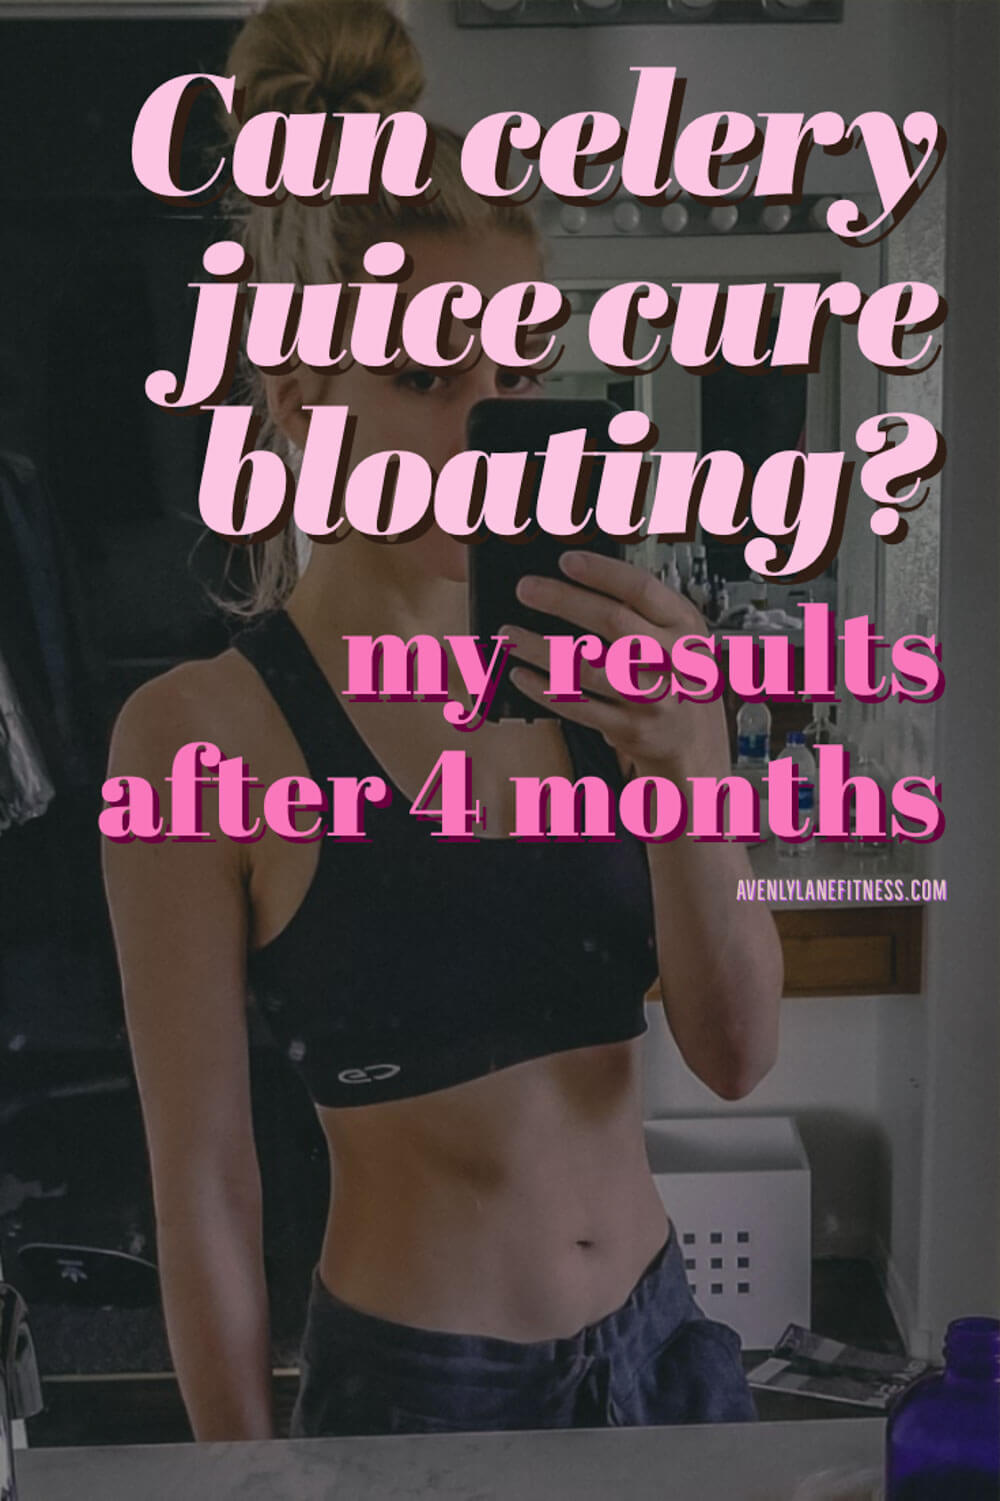 The Best Belly Bloat Cleanse - How I Ended a 7 Year Battle with Bloating -  Avenly Lane Fitness Blog